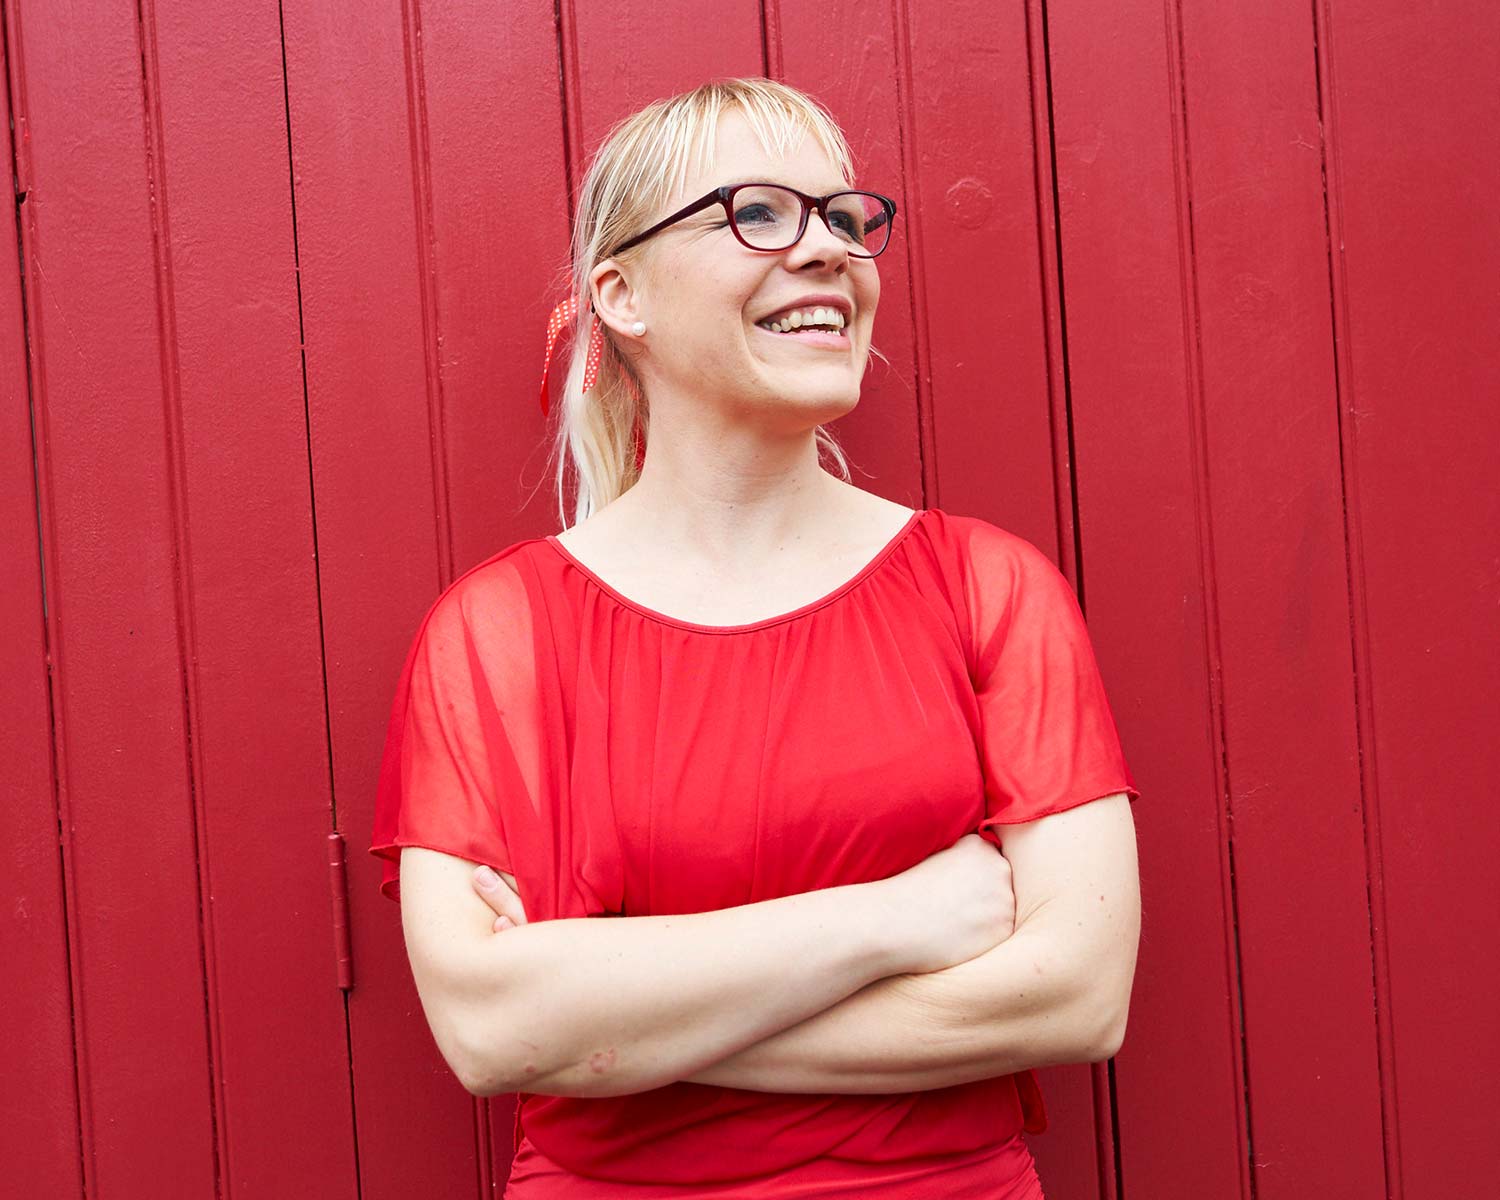 Tina stood in front of a red panelled door, her arms are folded and she's smiling at something off to the right of the camera